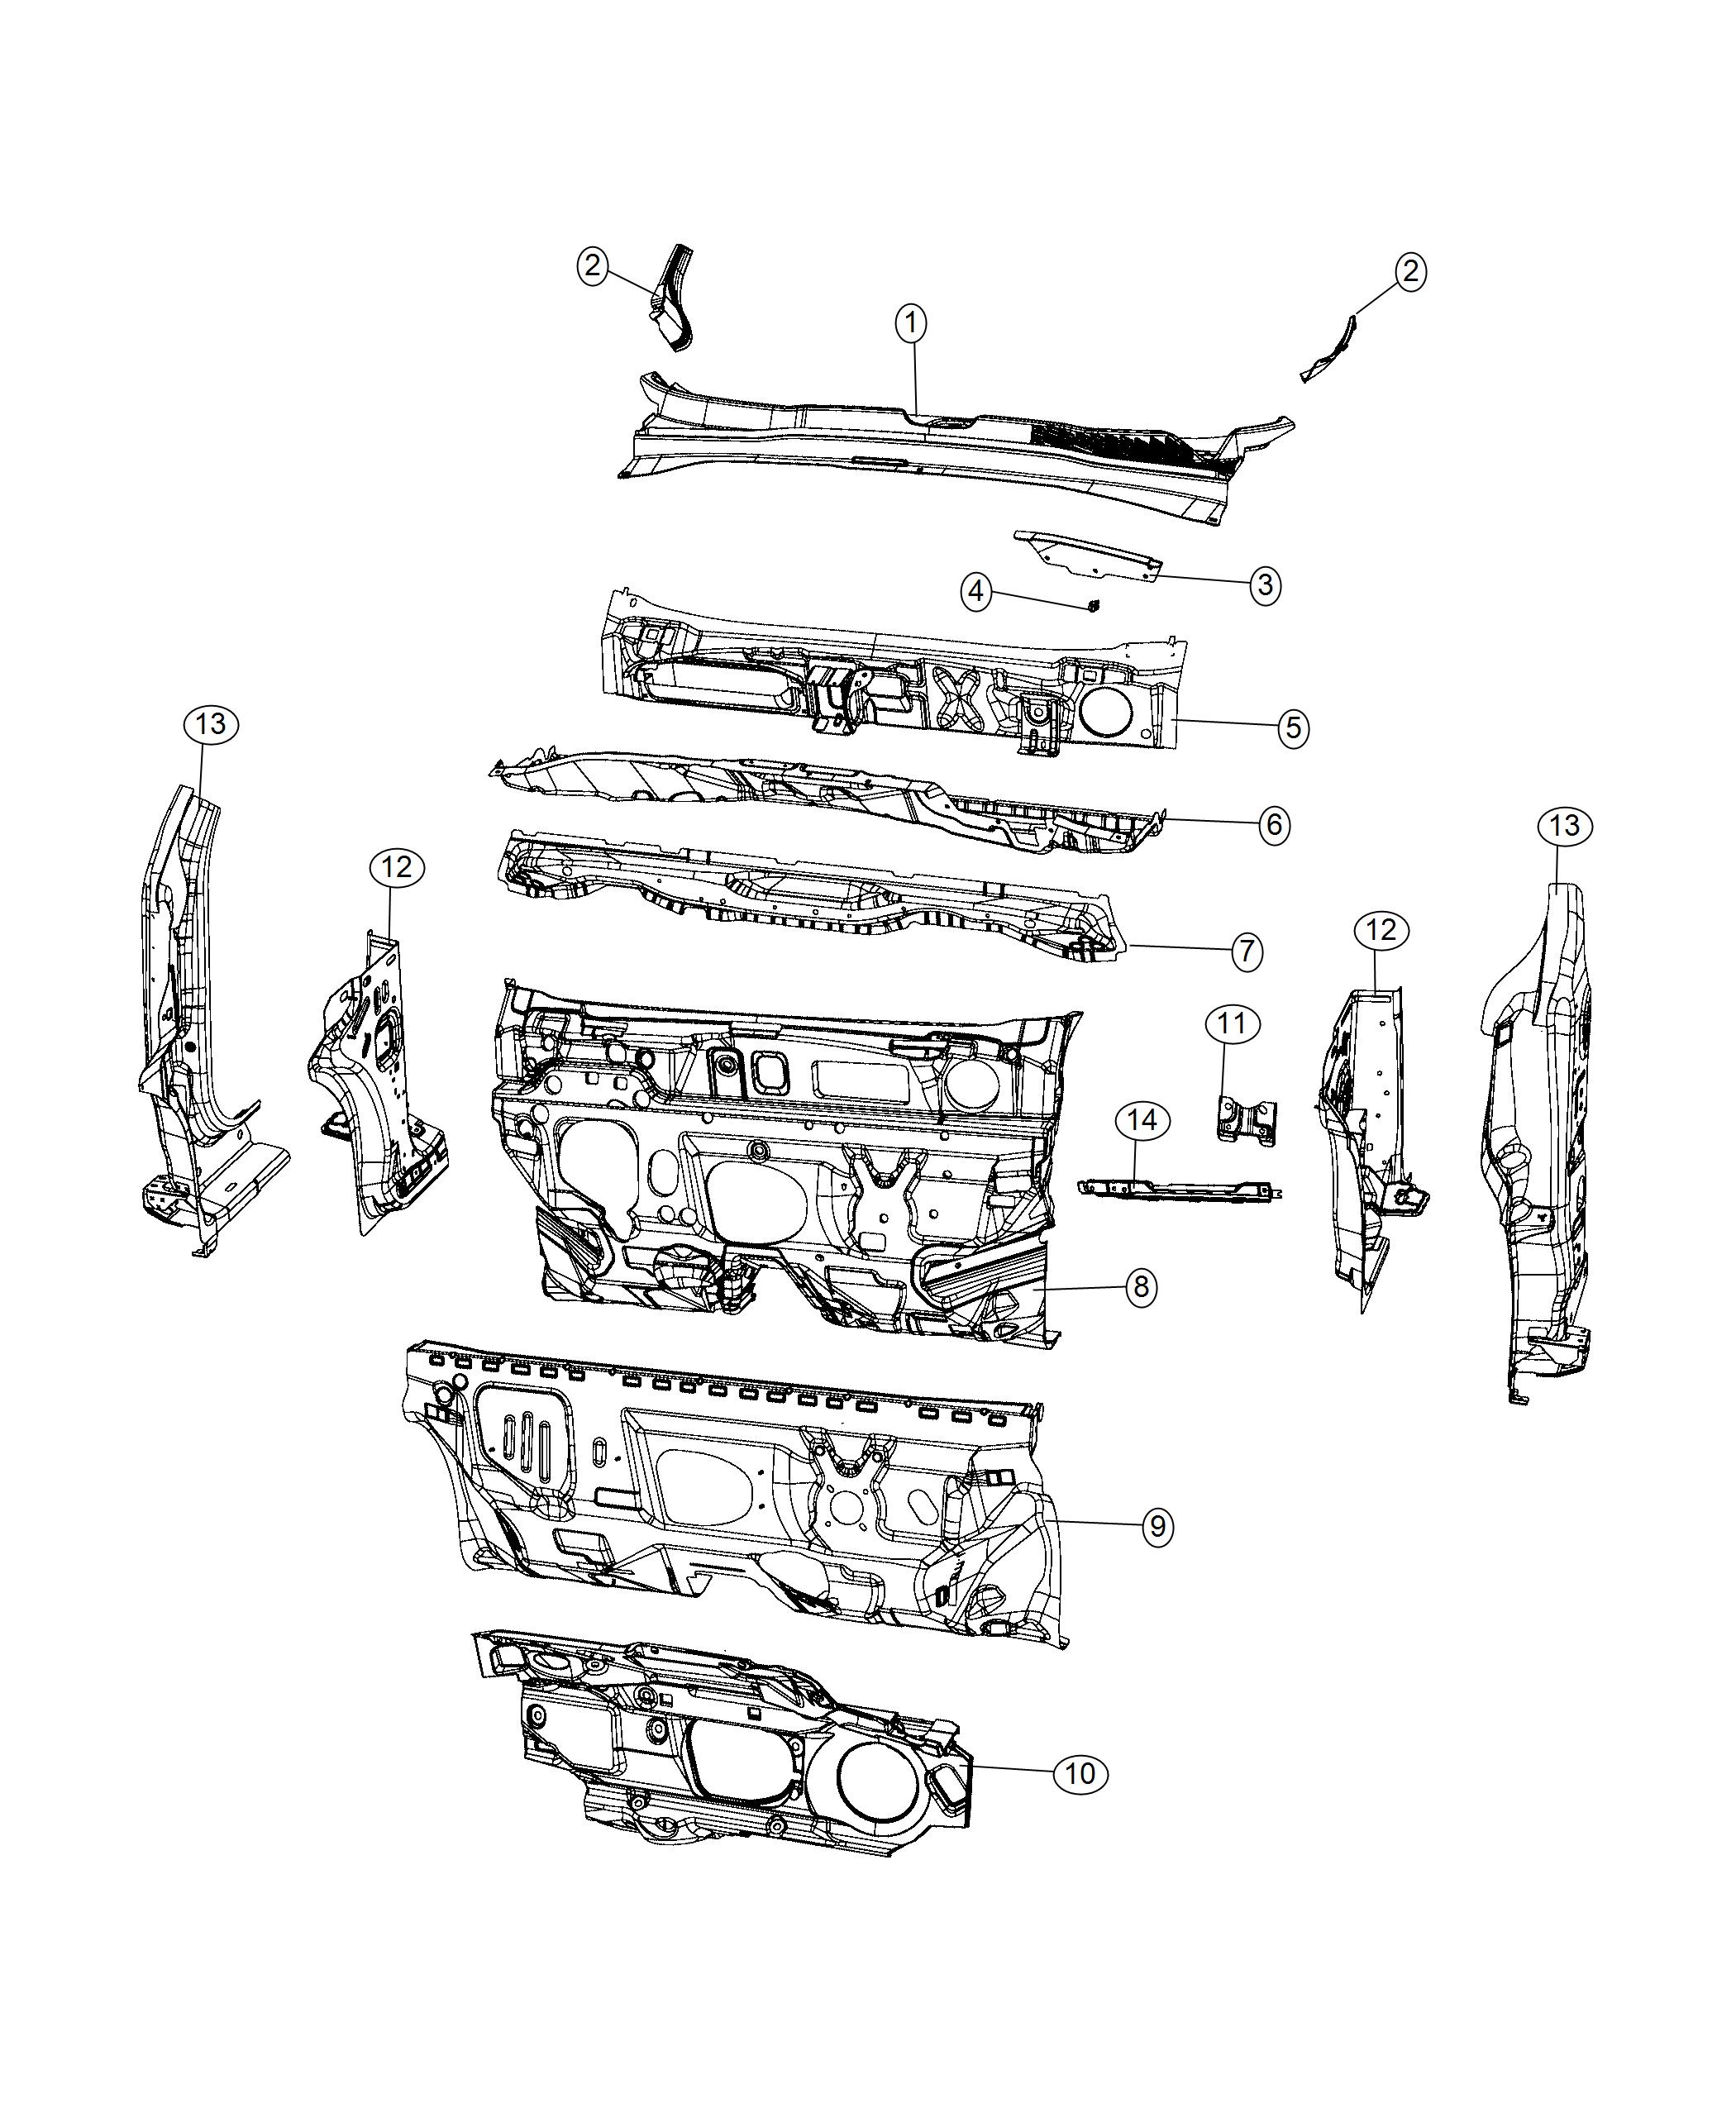 Cowl , Dash Panel and Related Parts. Diagram